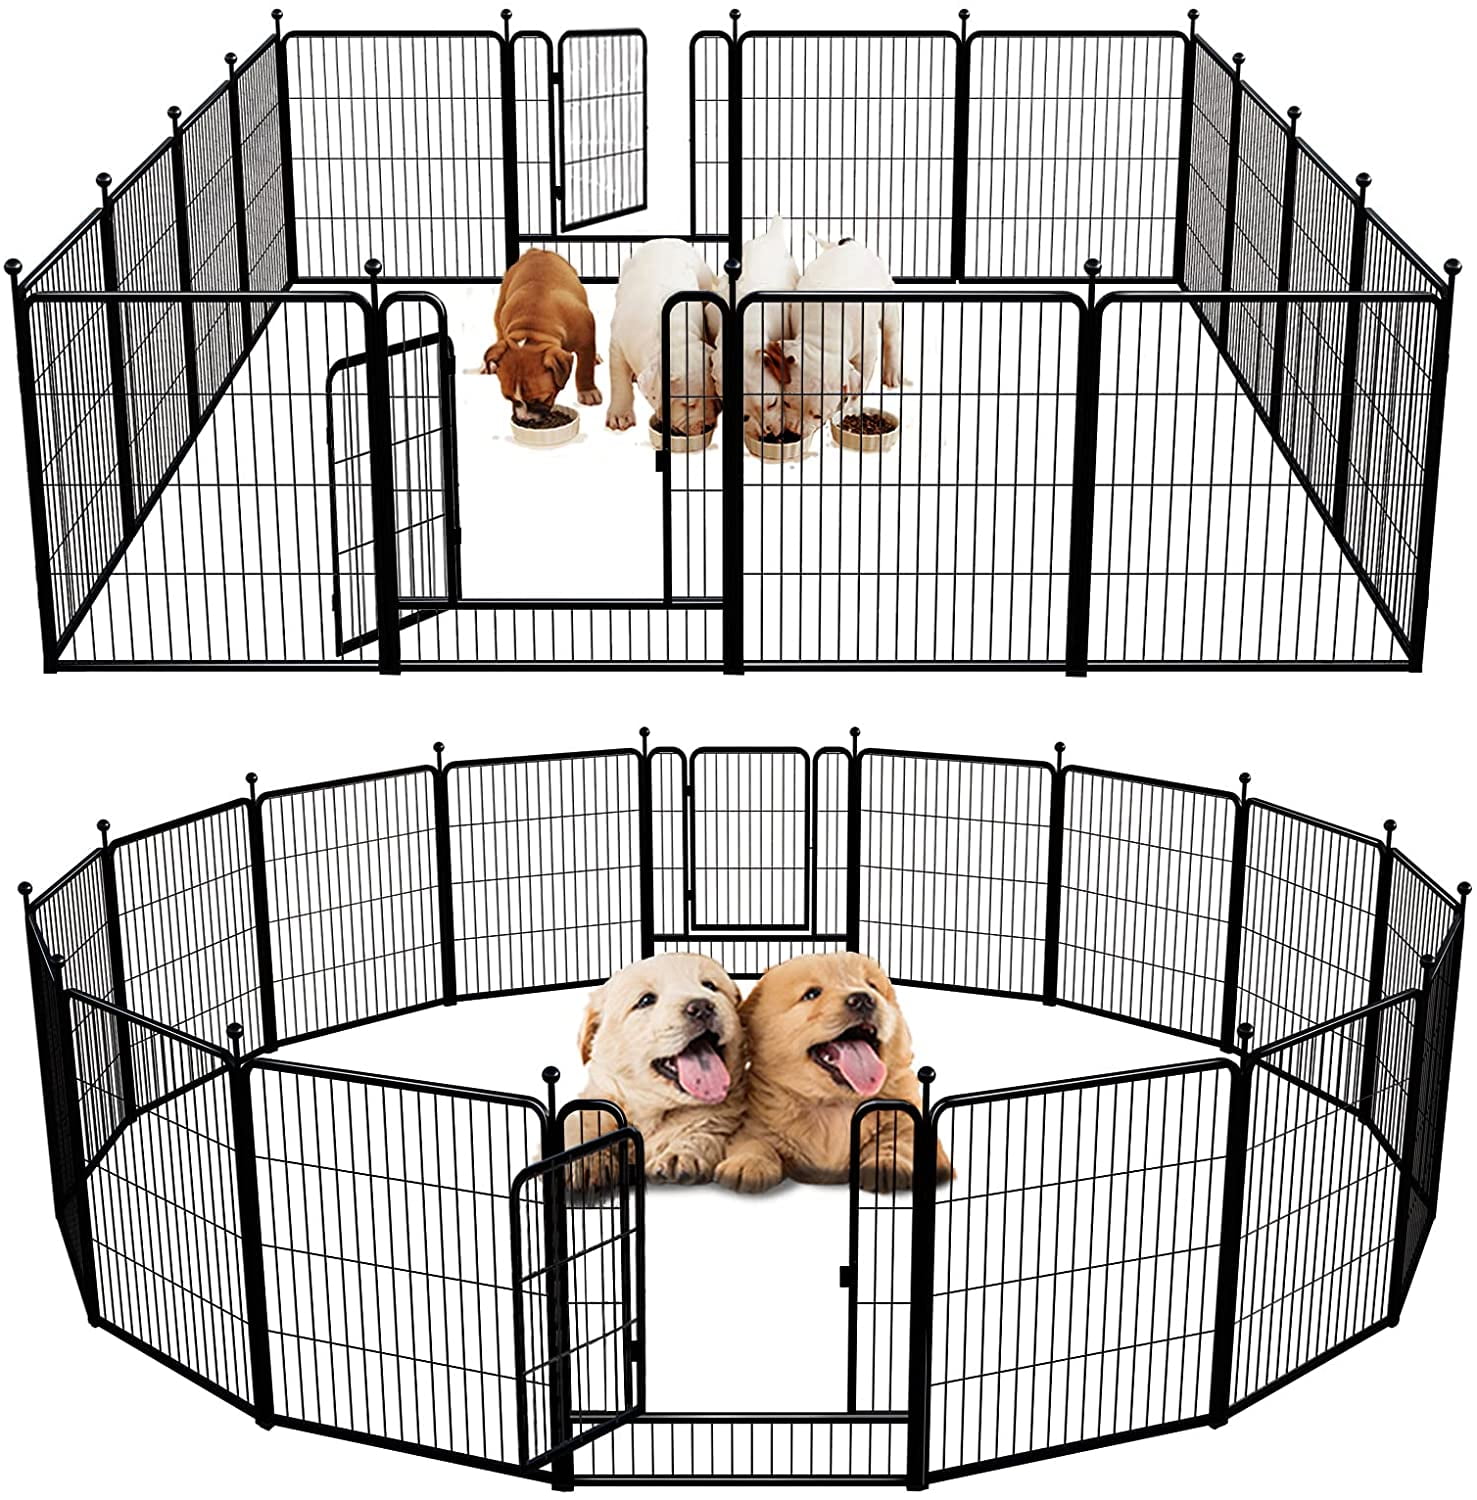 Small Pet Playpen Animal Cage Dog Fences Enclosure Small Puppy Play Yard Crate 